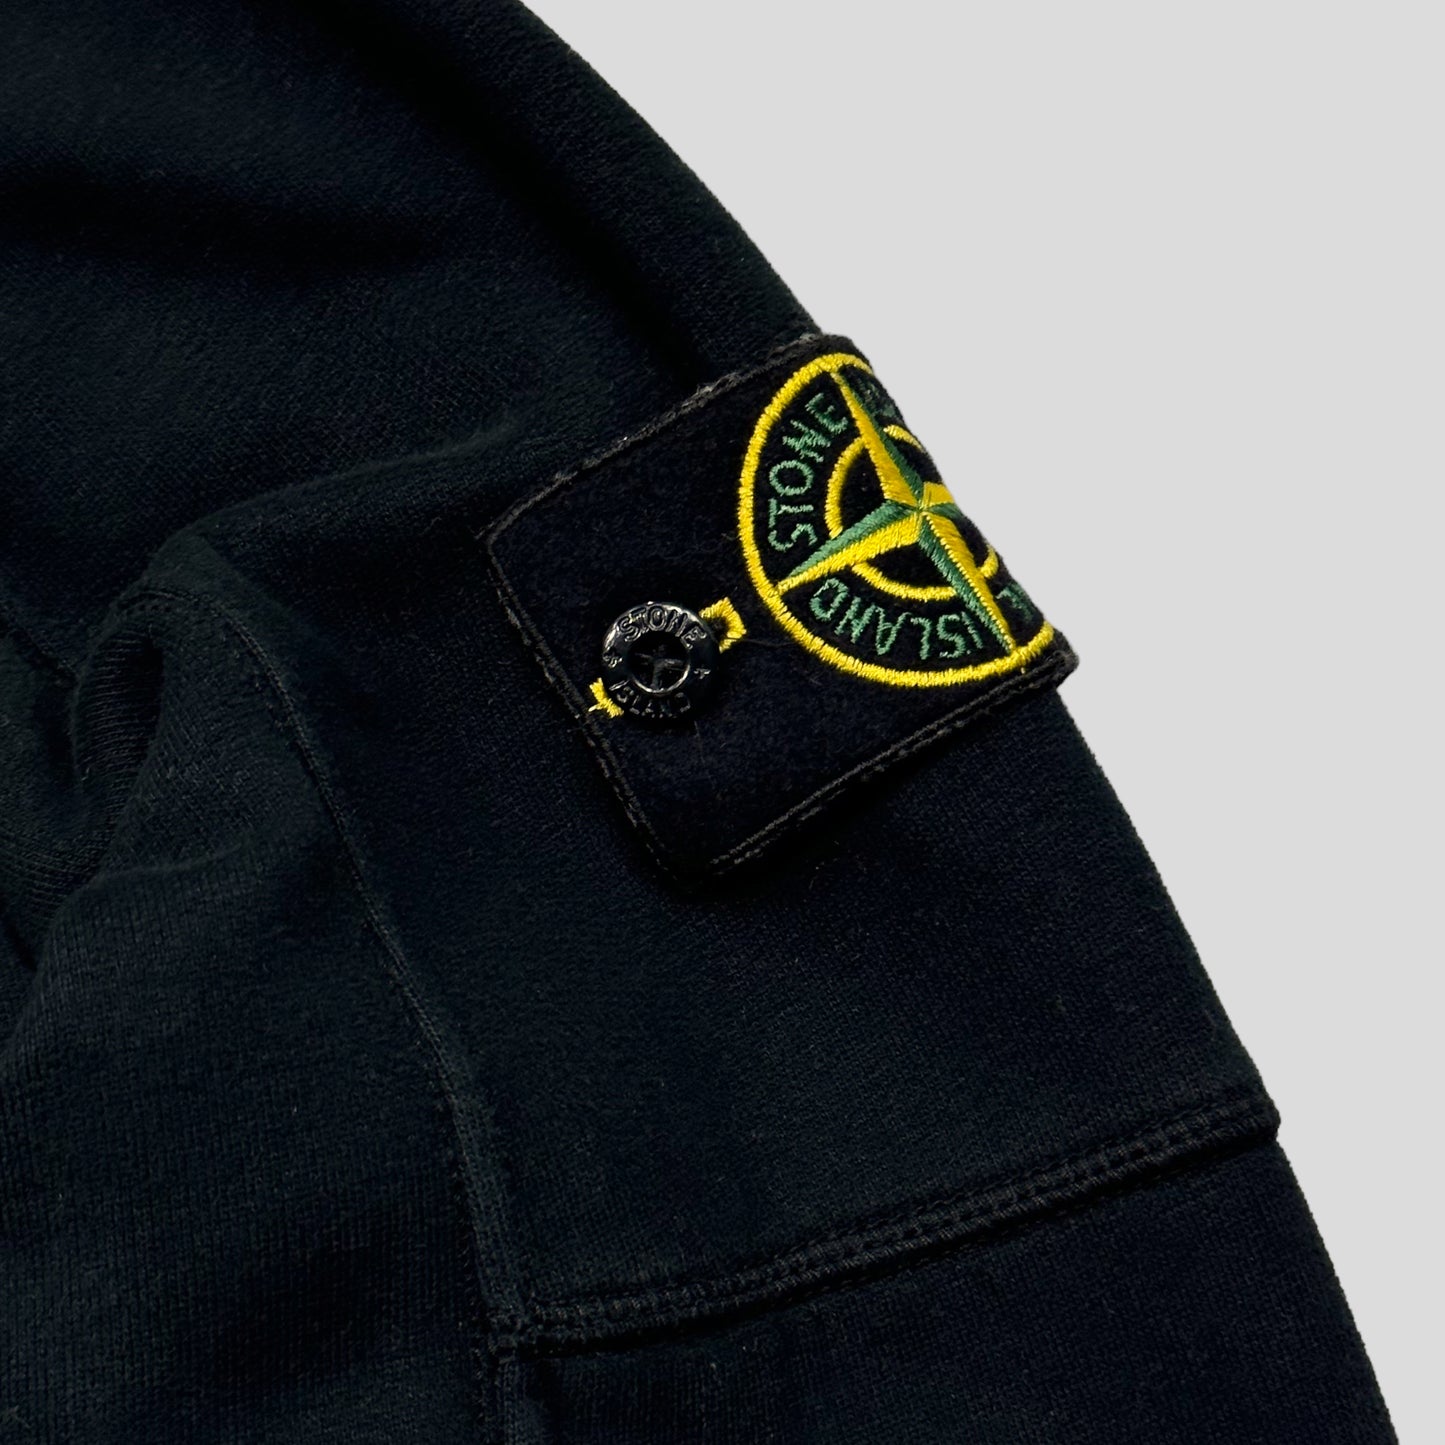 Stone Island SS15 Embroidered Spellout Panelled Crewneck - M/L